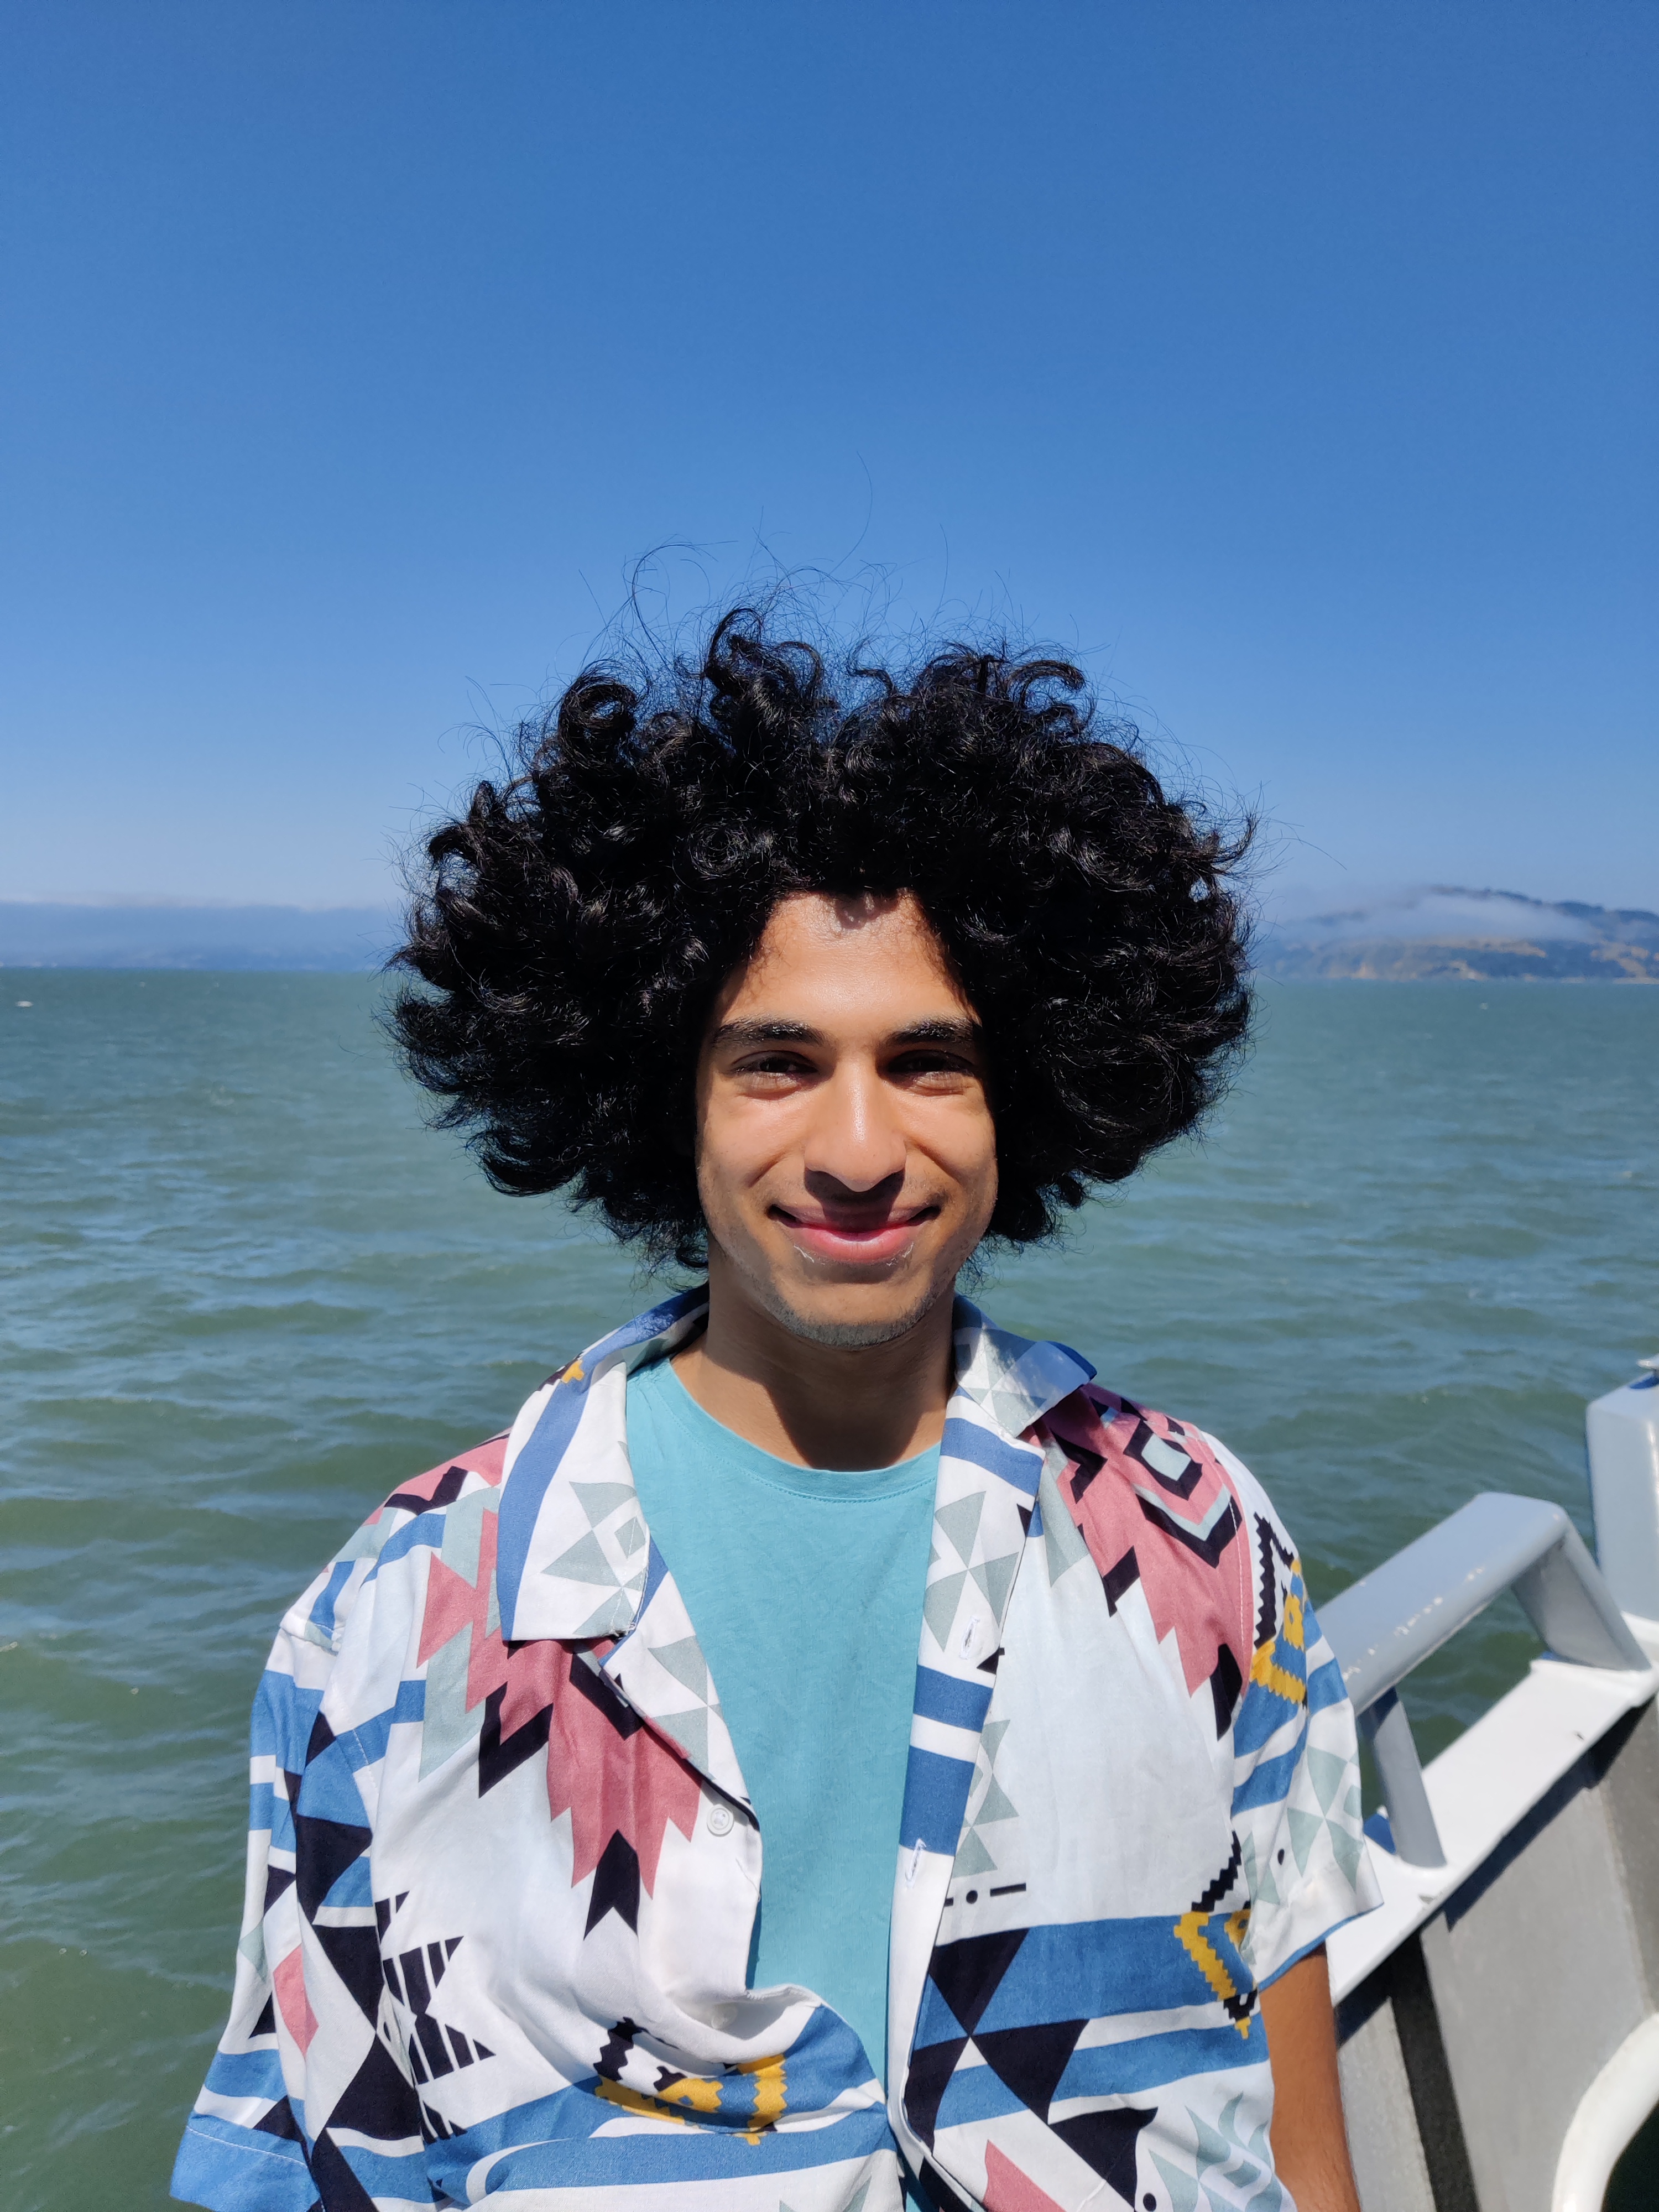 Me standing on a boat with messy hair being blown about